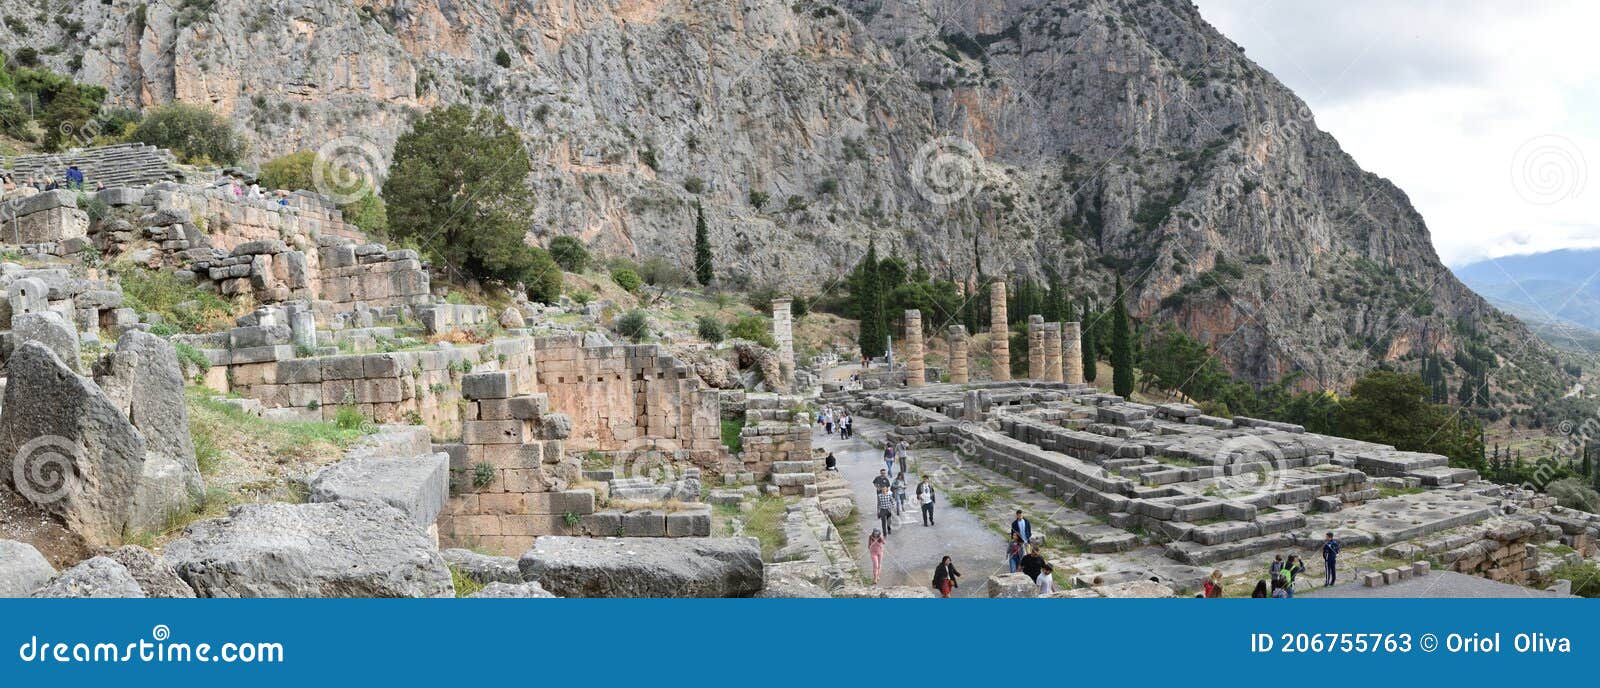 panoramic view of the main monuments and places of greece. ruins of ancient delphi. oracle of delphi